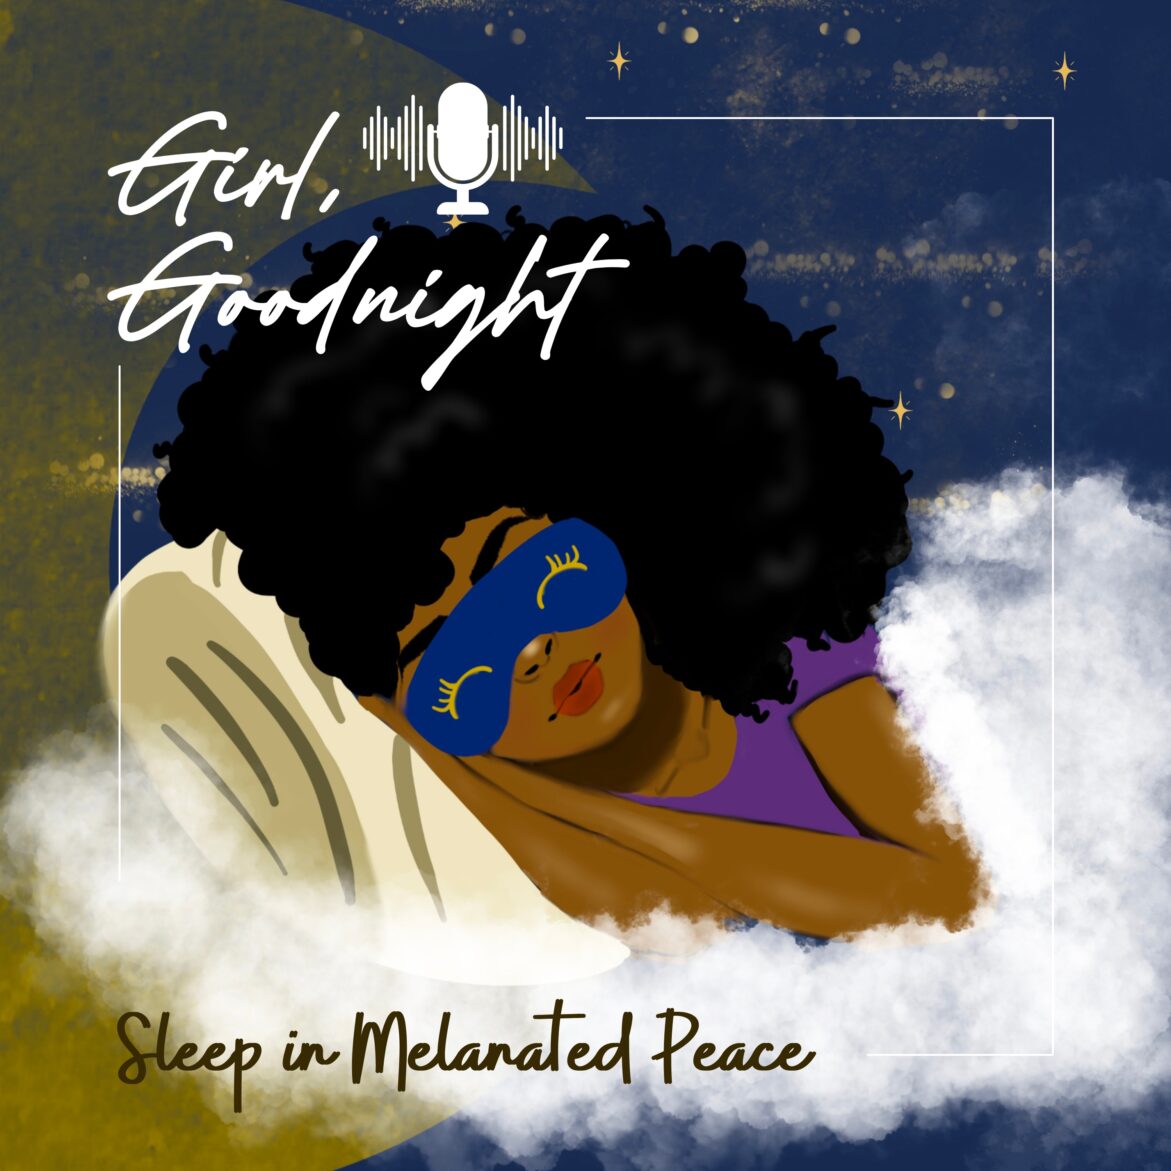 Black Podcasting - The Girl, Goodnight Cap- Passages from a Put Together Broken Heart Finale